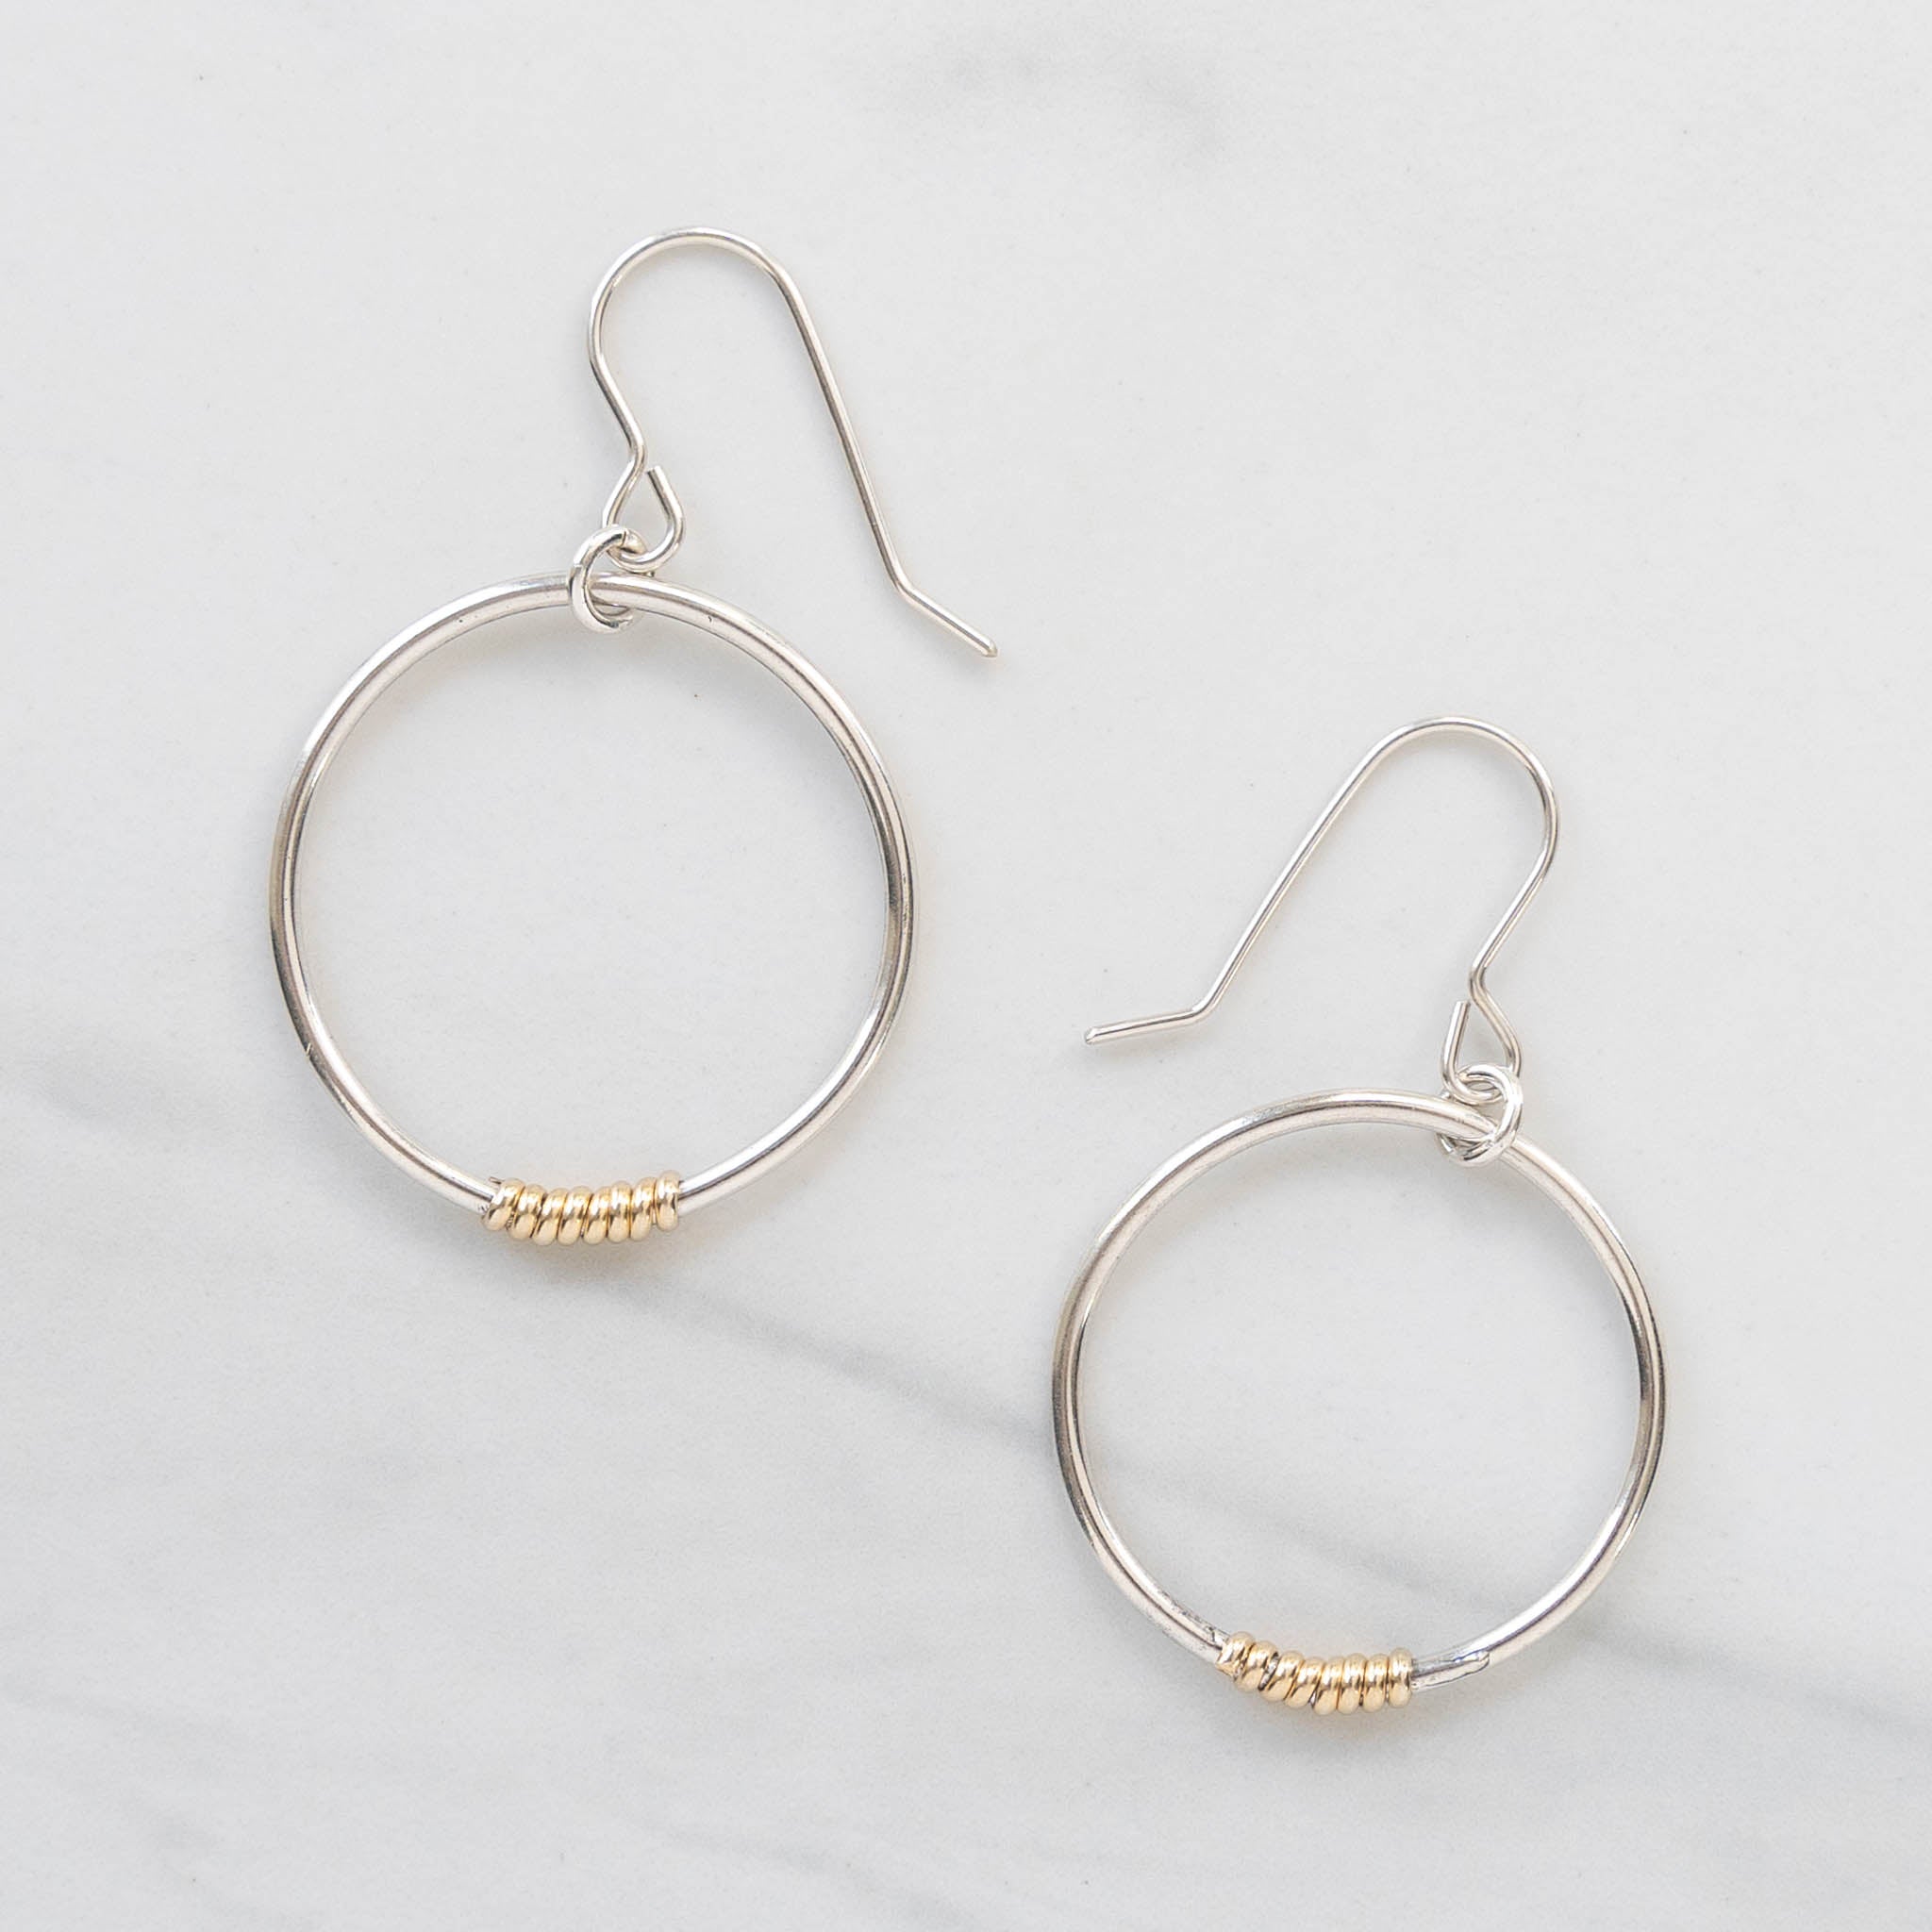 Coils Collection - Recycled Sterling Silver Hoop Earrings with Gold Coils |  MARTINIJewels